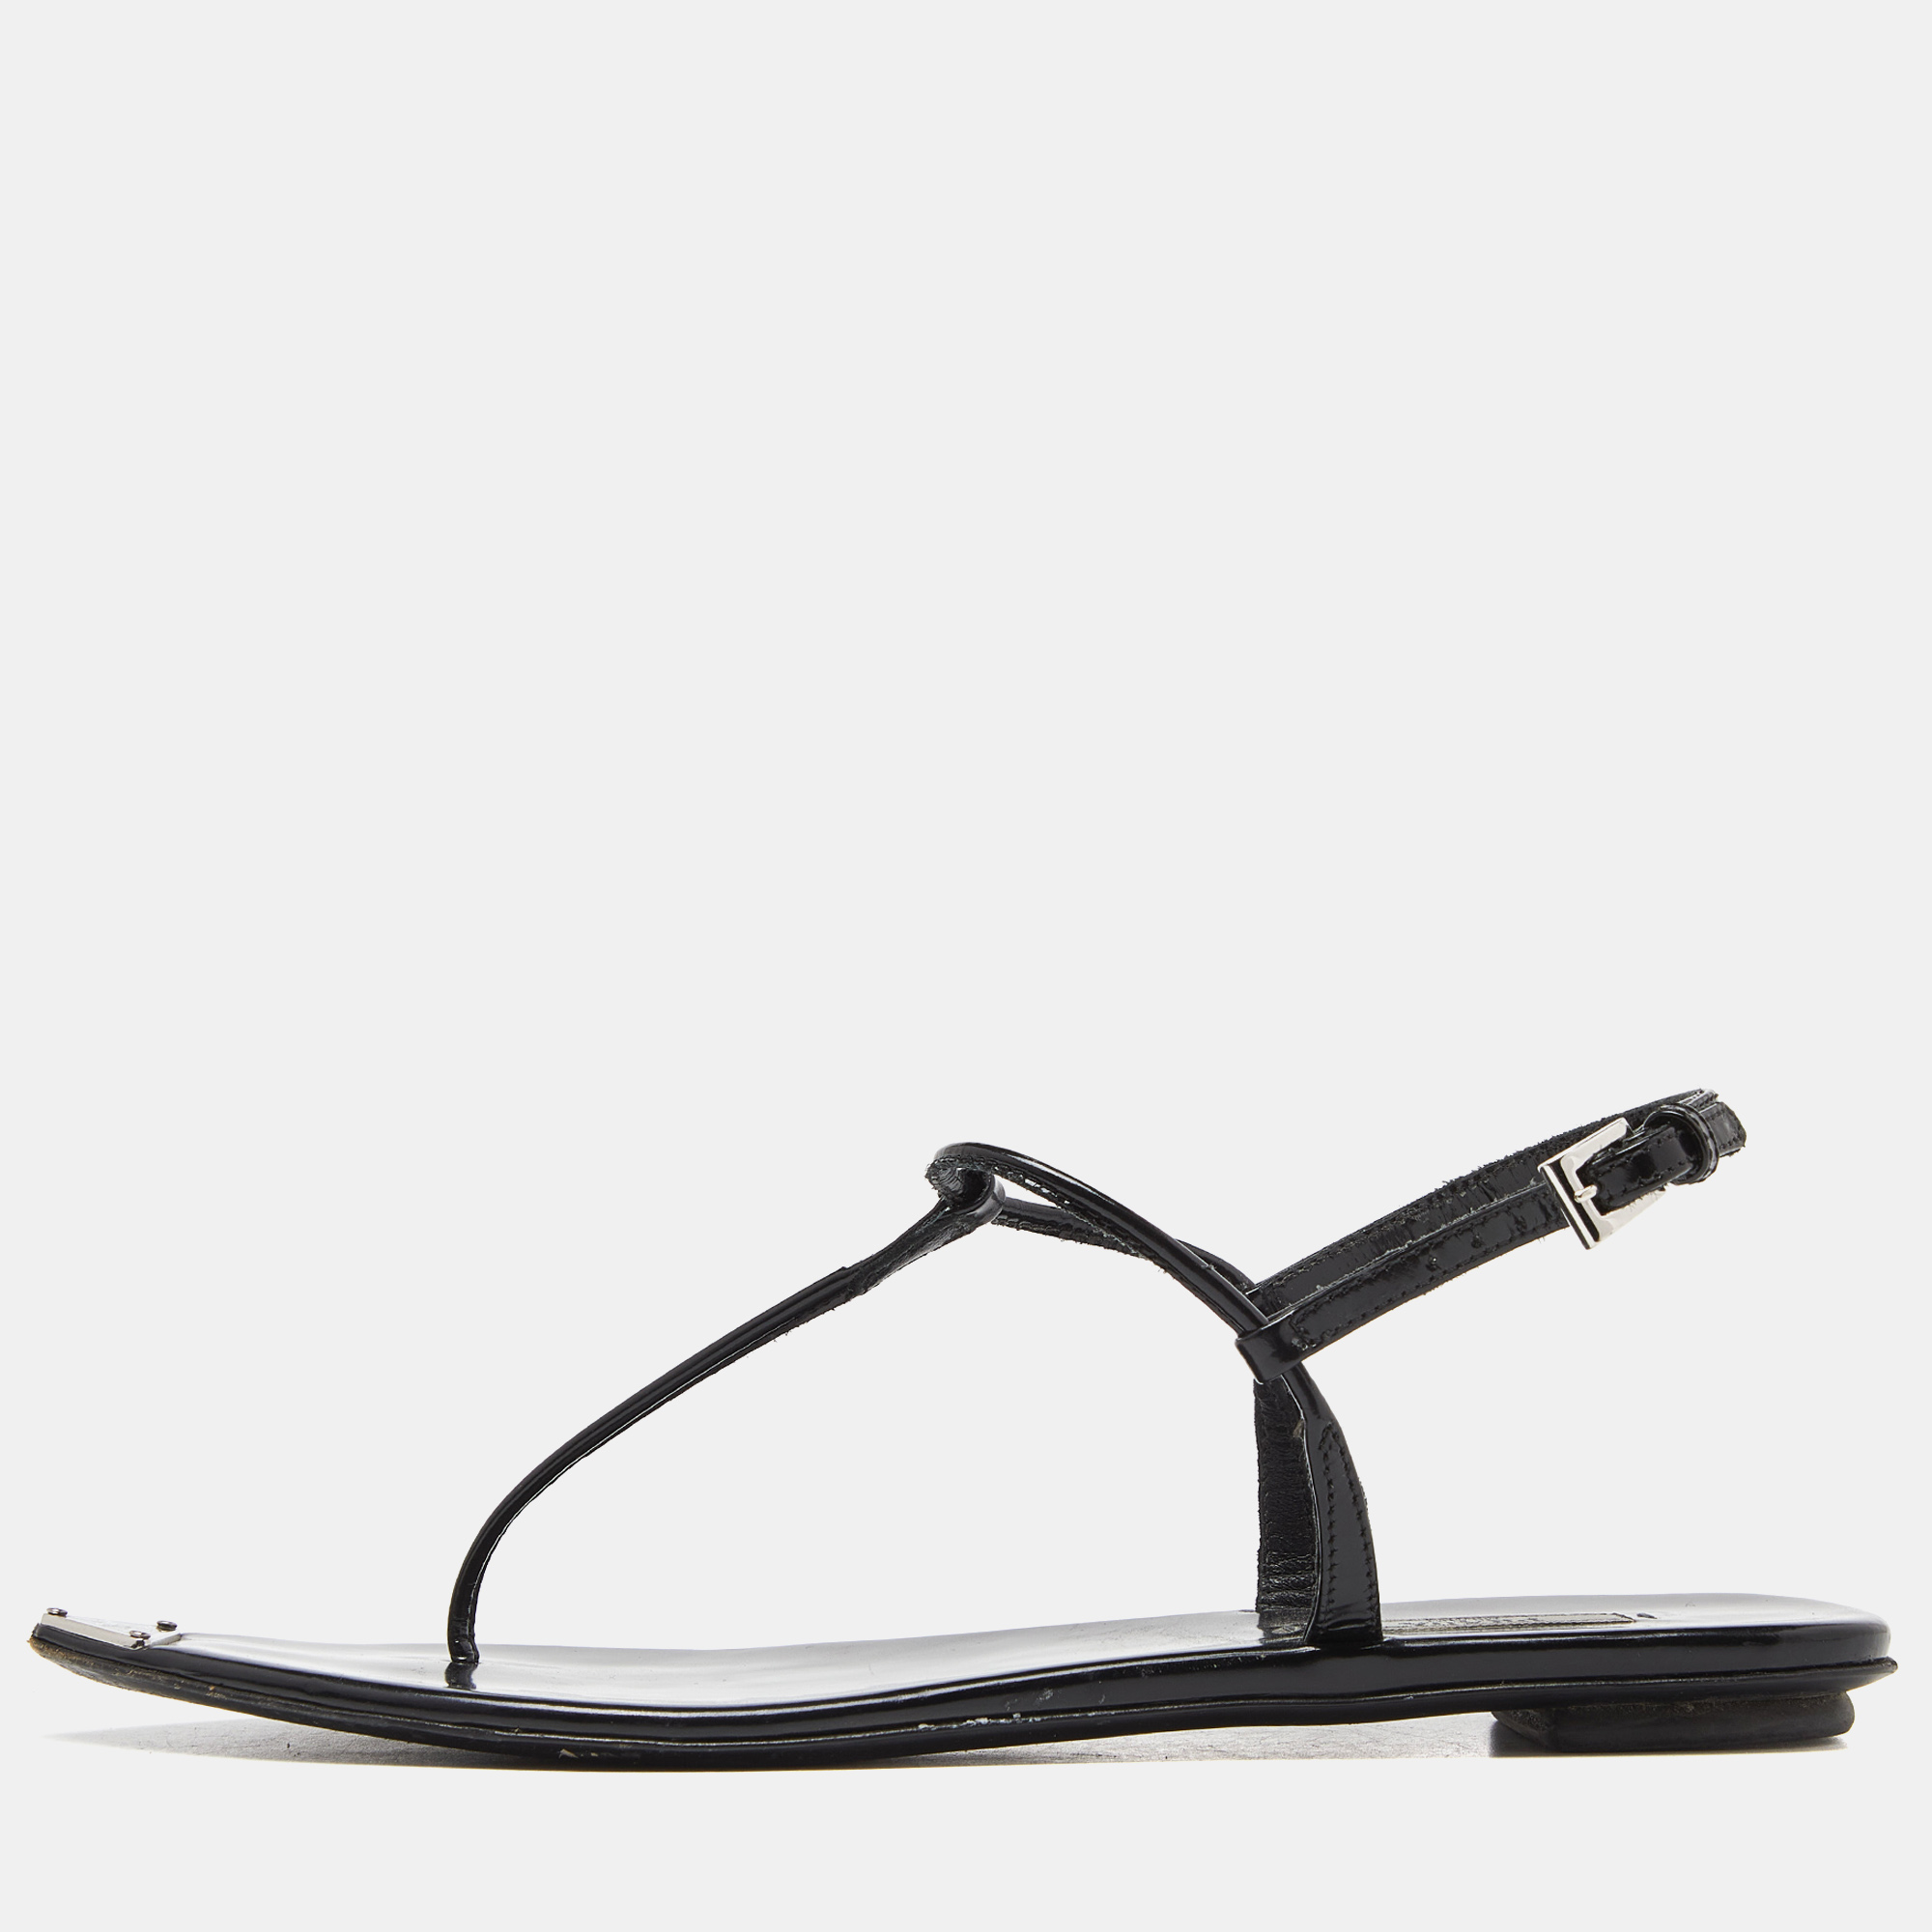 Prada black patent leather thong ankle strap flats size 38